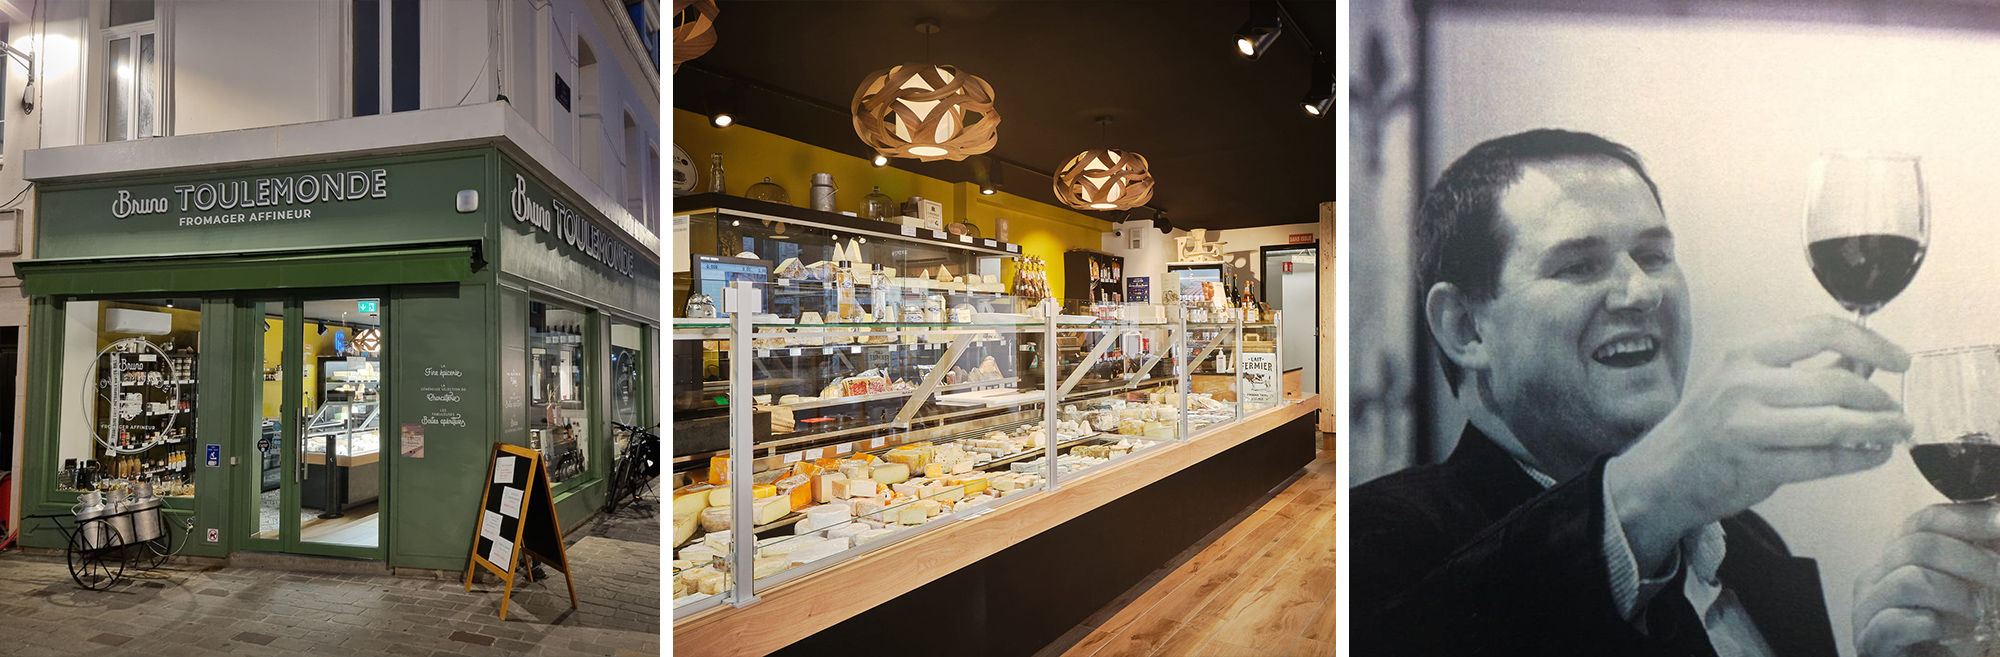 Histoire fromagerie Toulemonde